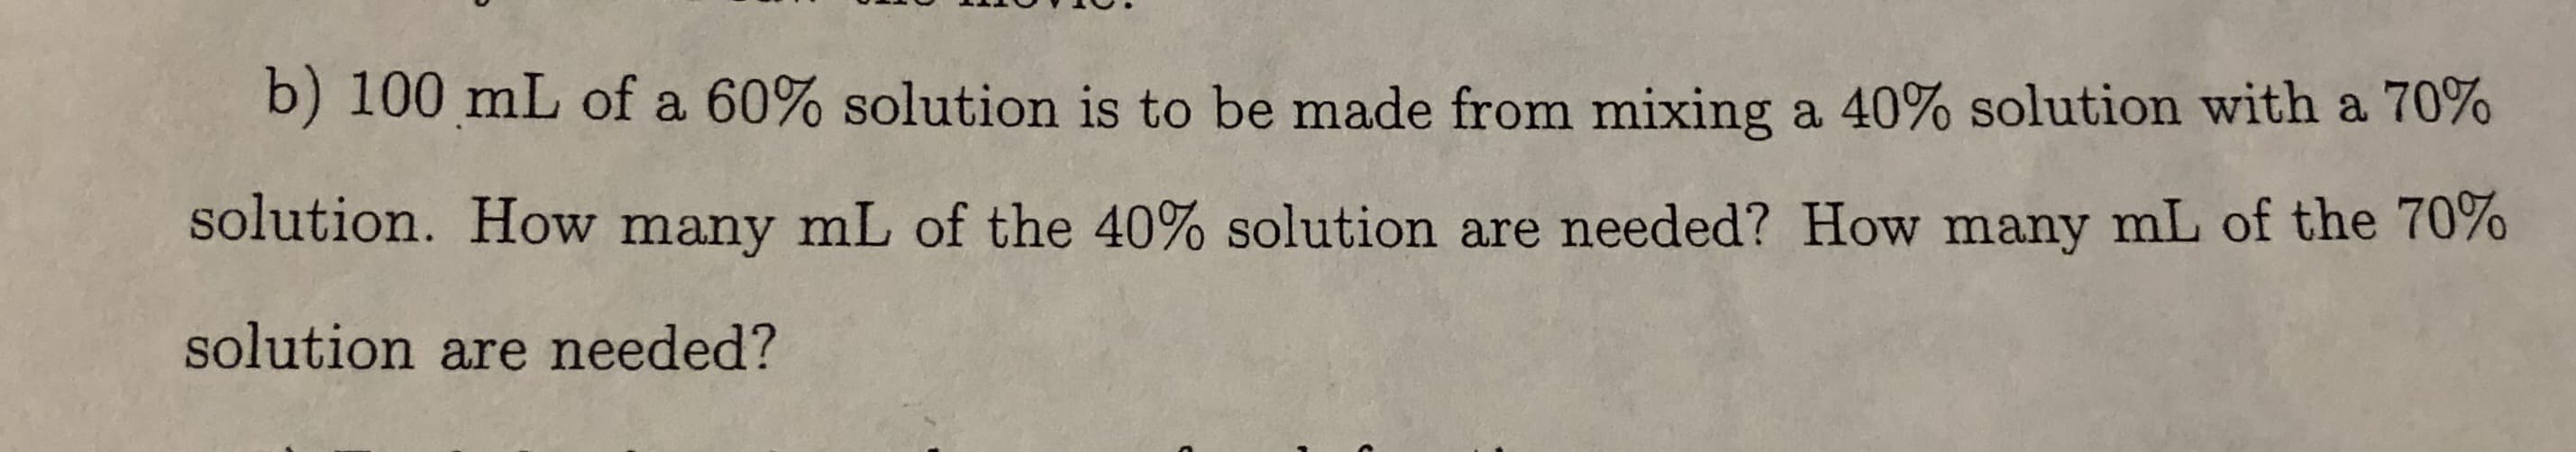 b) 100 mL of a 60% solution is to be made from mixing a 40% solution with a 70%
solution. How many mL of the 40% solution are needed? How many mL of the 70%
solution are needed?
